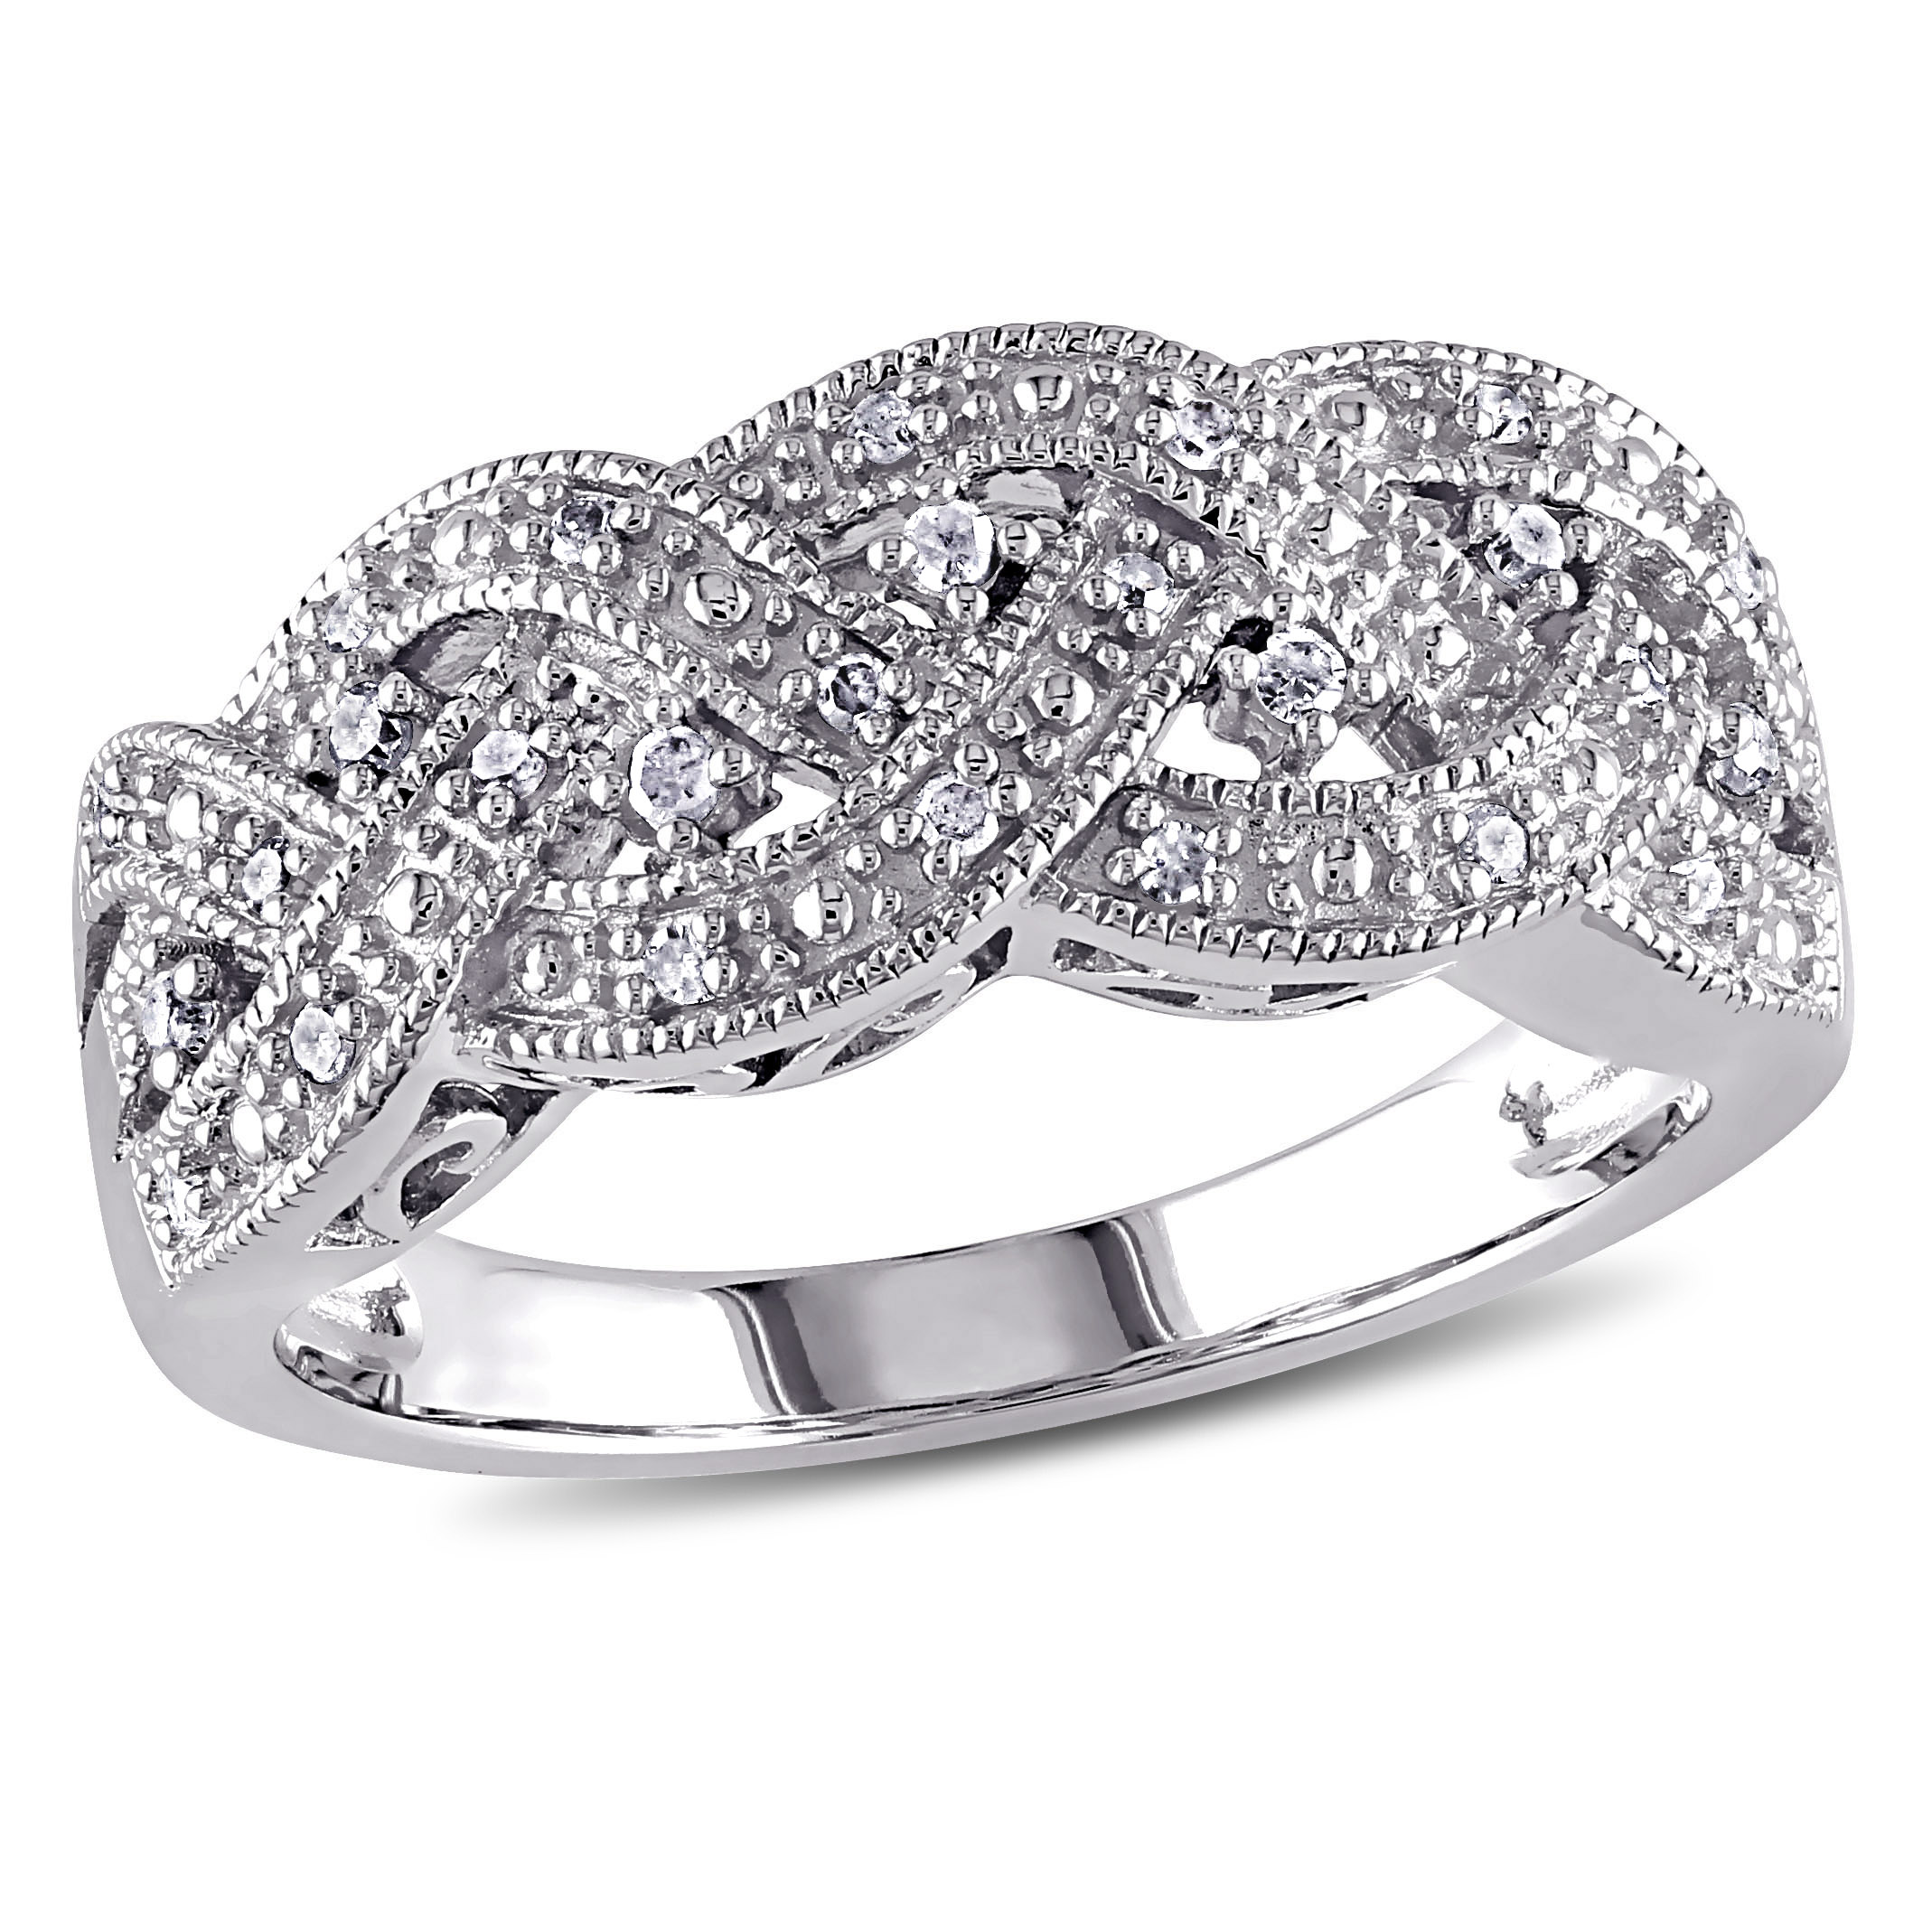 1/8 CT TW Braided Diamond Ring in Sterling Silver